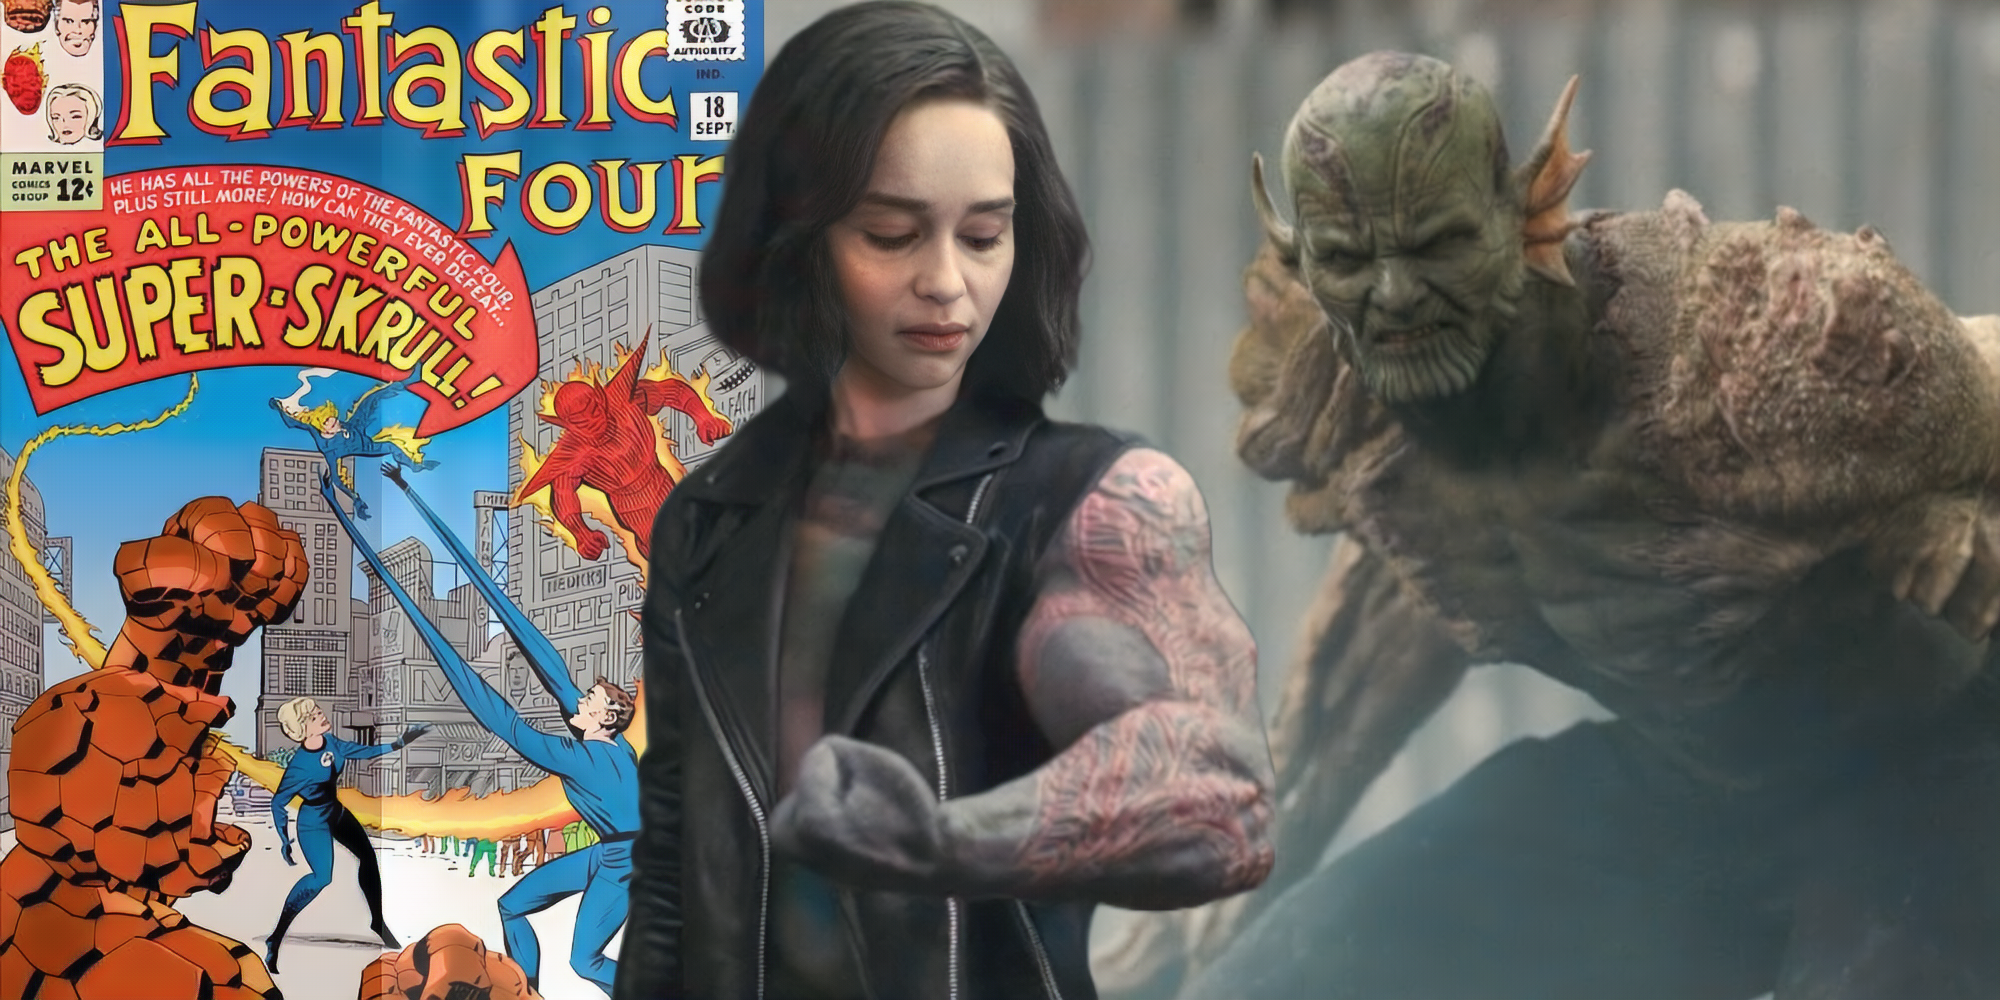 Fantastic Four Vol 1 #18 Comic Cover With Emilia Clarke's G'iah, and Super-Skrull Gravik.